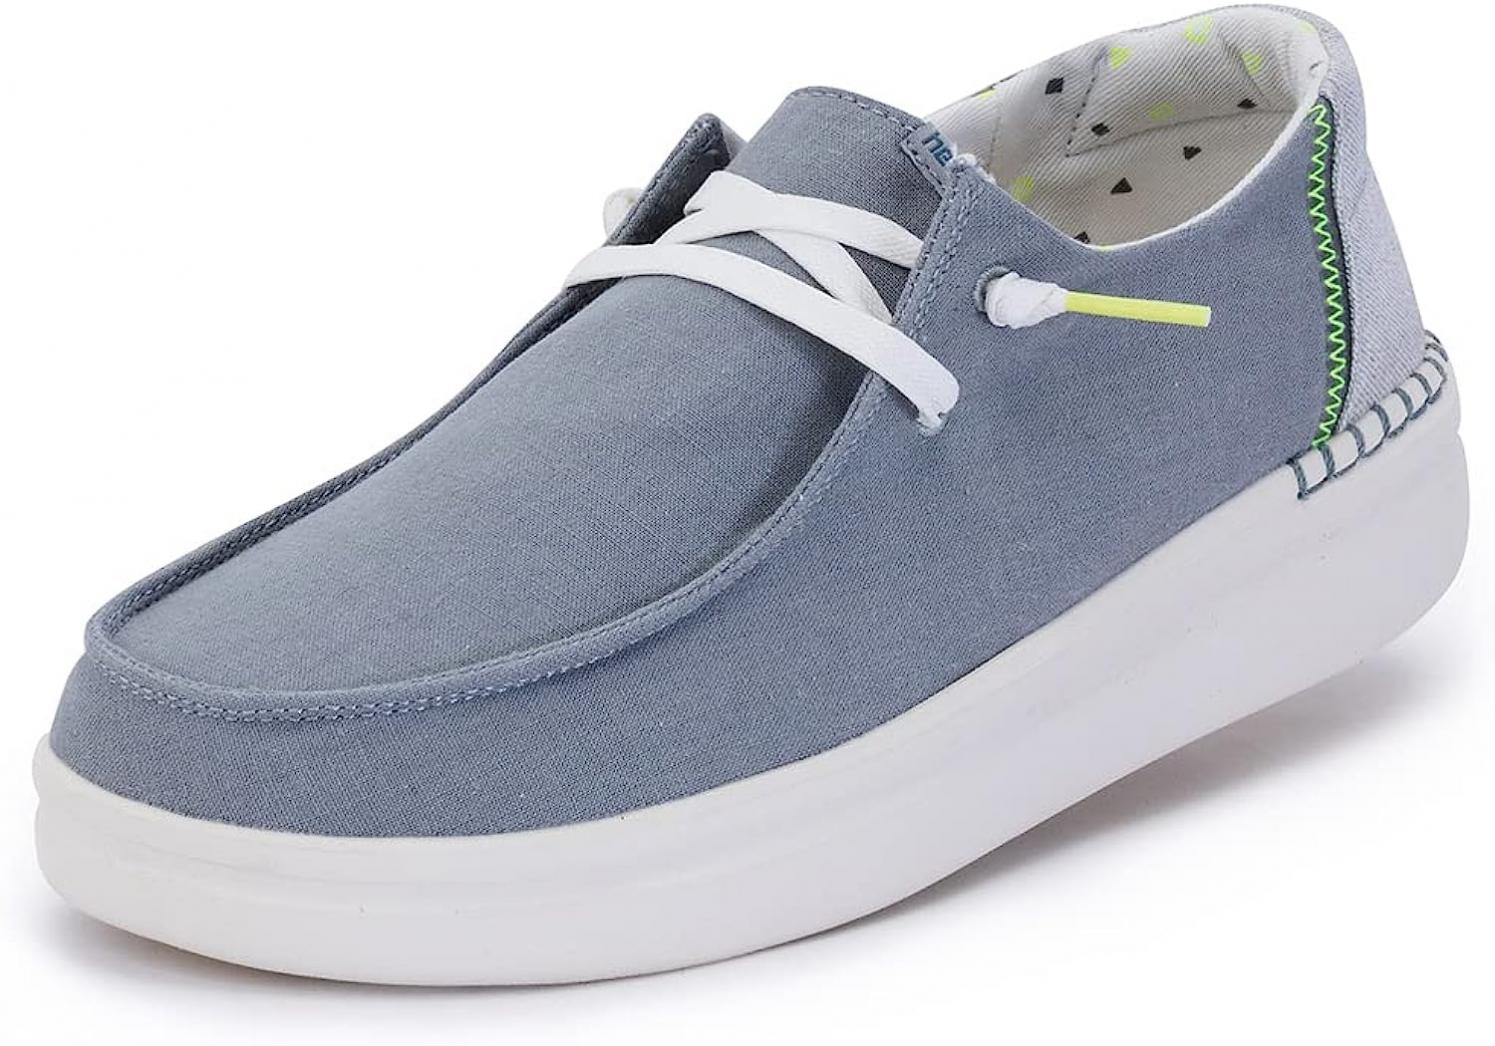 Hey Dude Women's Wendy Rise Chambray Abyss Blue Size 7 | Women’s Shoes | Women’s Lace Up Loafers | Comfortable & Light-Weight